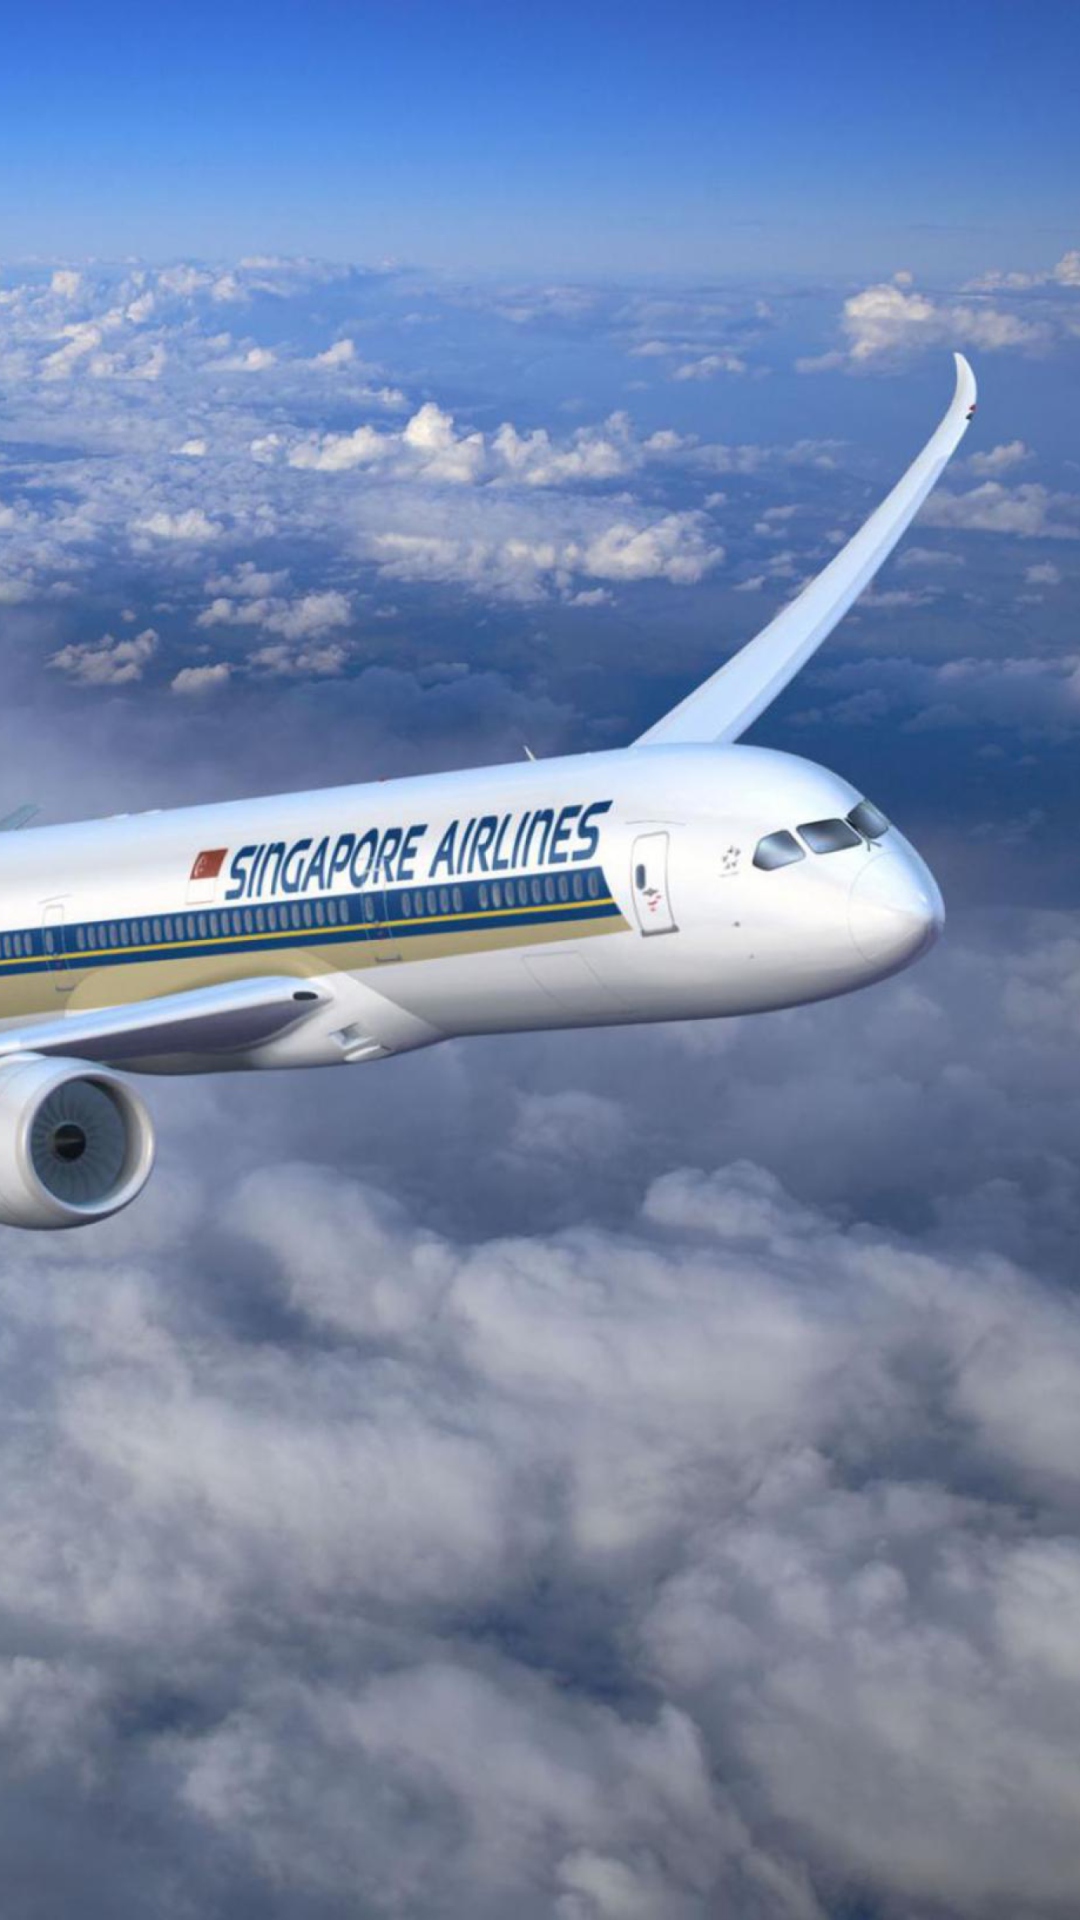 Singapore Airlines wallpaper 1080x1920